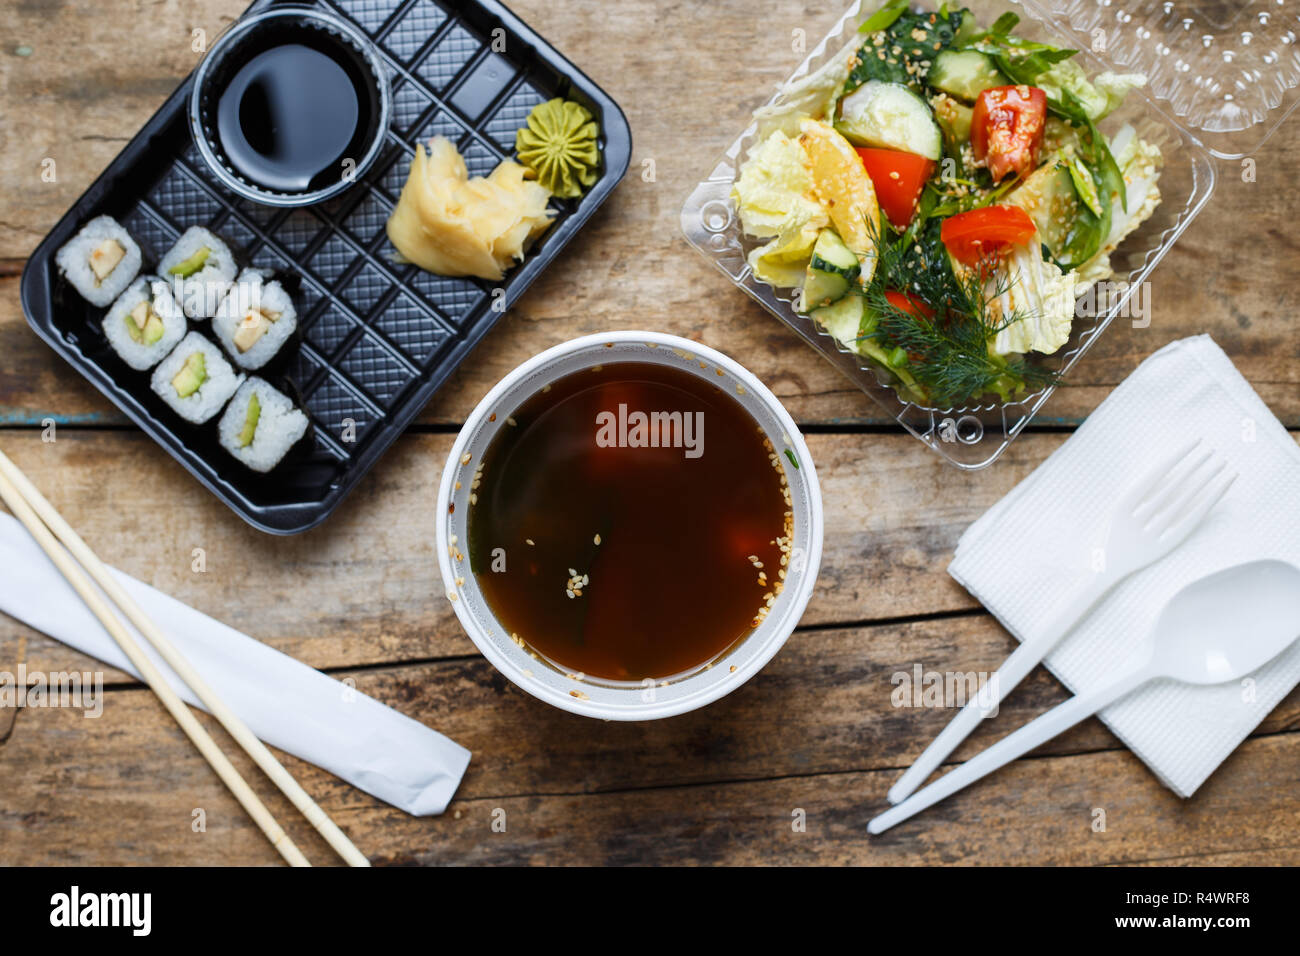 Asian business lunch delivery food background. Top view concept image of food delivery Stock Photo